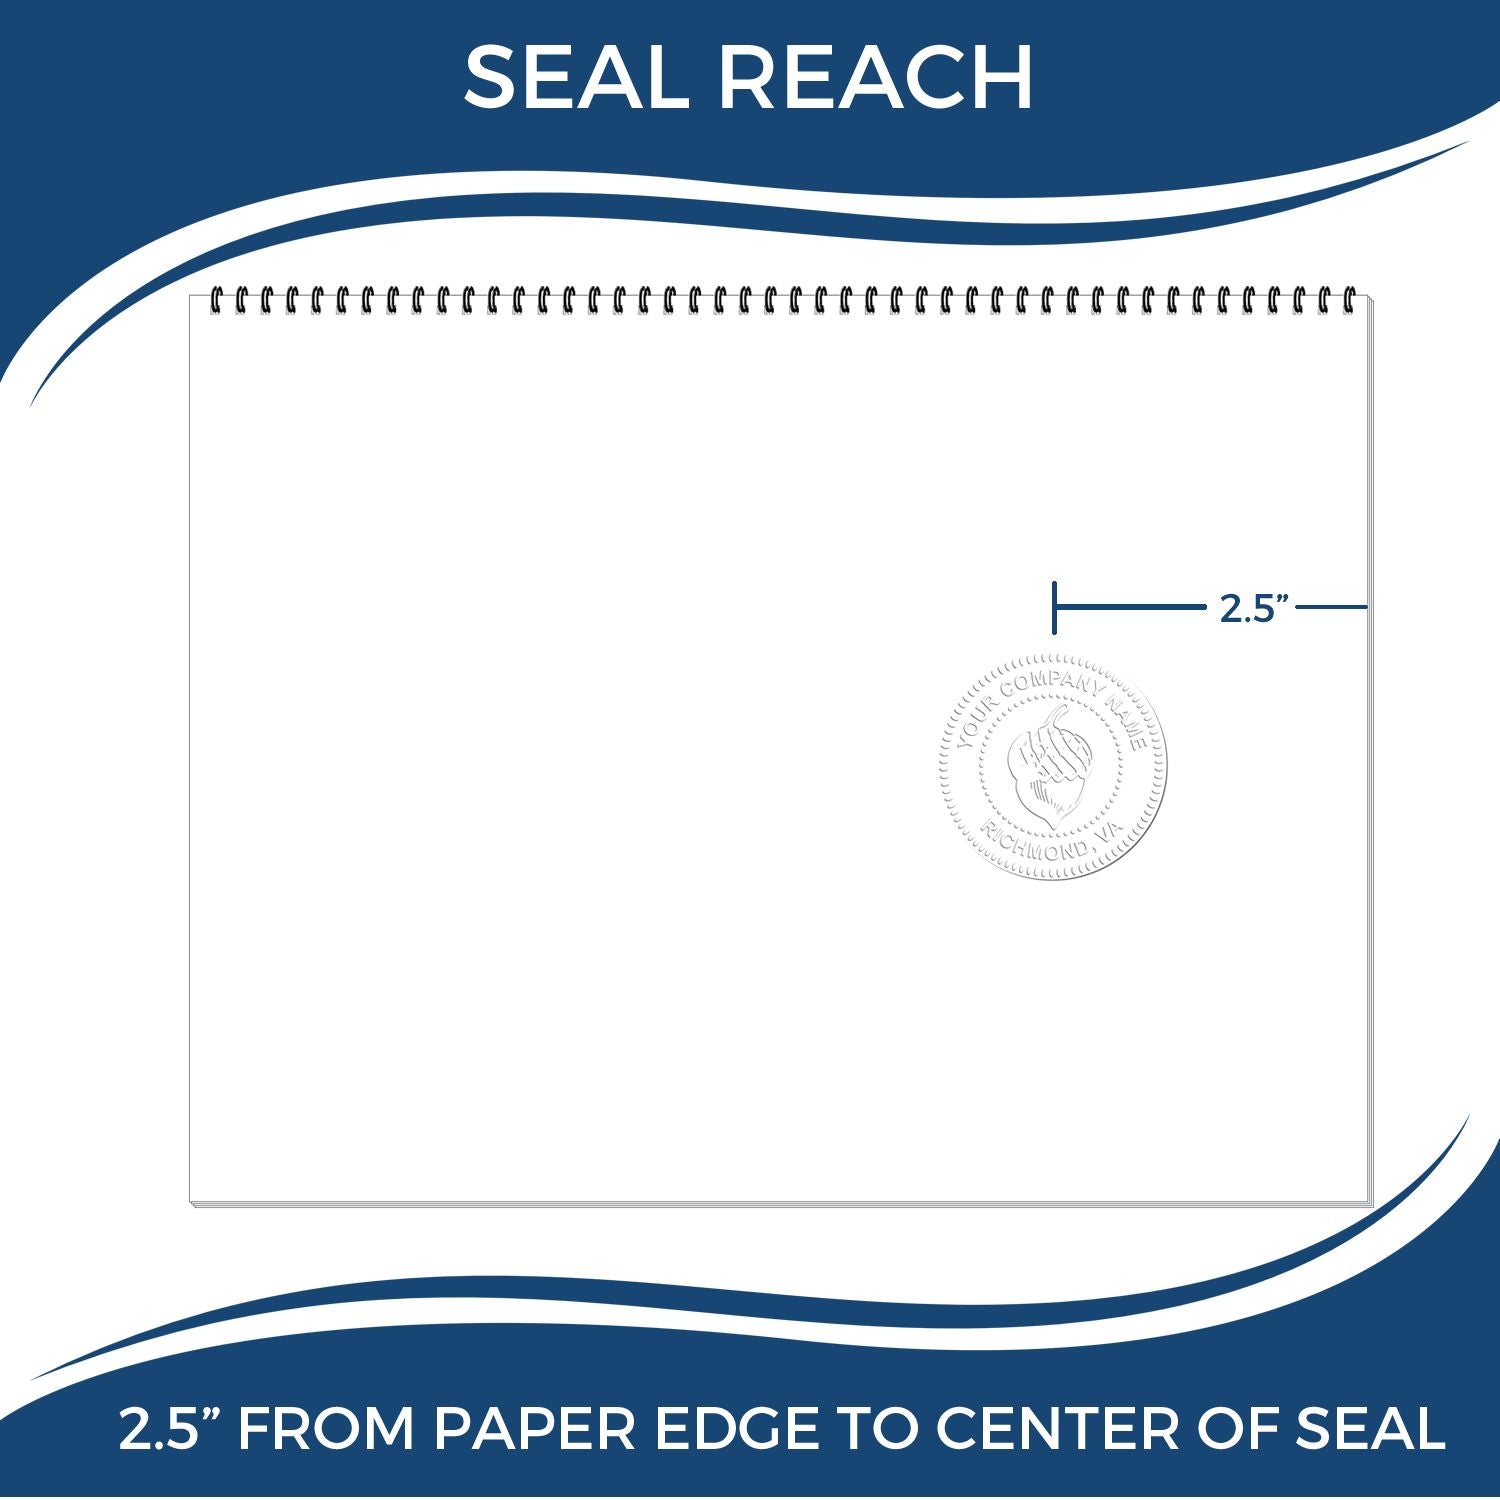 An infographic showing the seal reach which is represented by a ruler and a miniature seal image of the State of Oklahoma Long Reach Architectural Embossing Seal